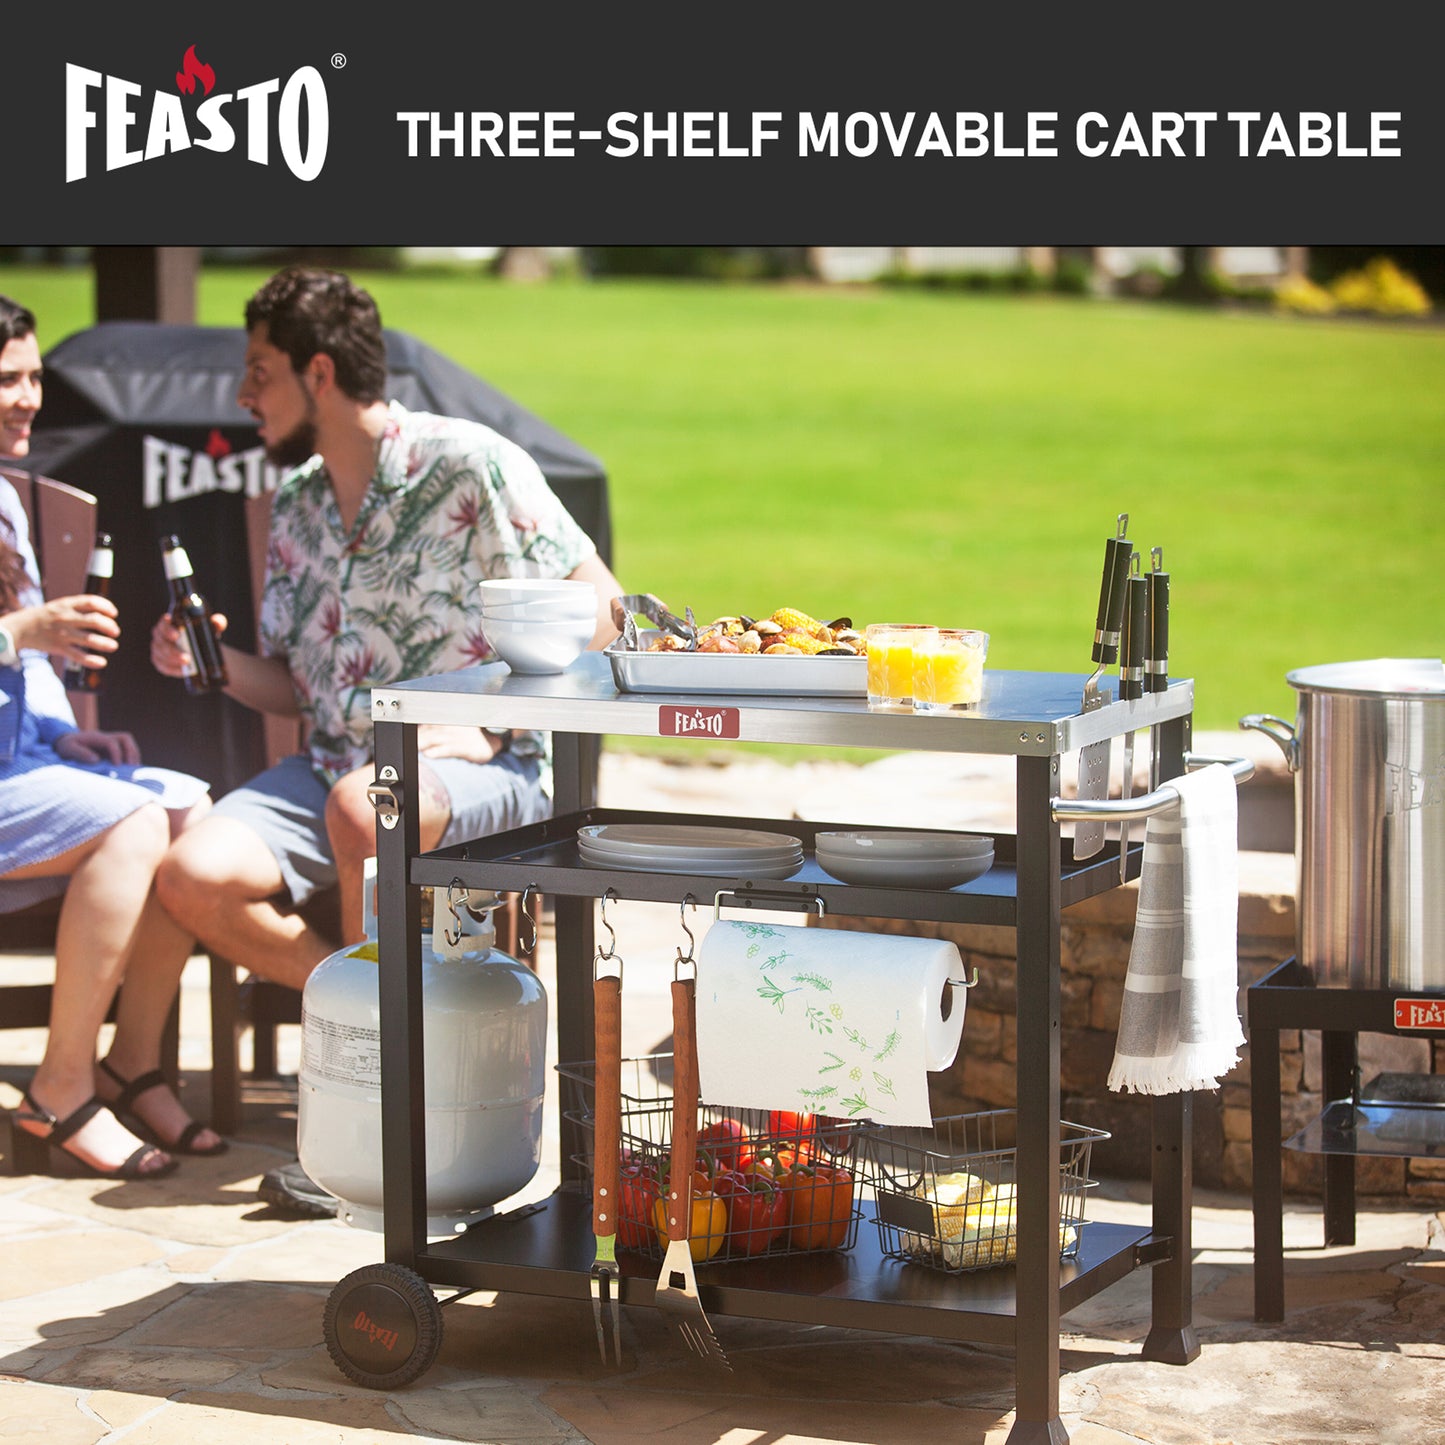 FEASTO Three-Shelf Movable Food Prep and Work Cart Table Home and Outdoor Multifunctional Stainless Steel Table Top Worktable on Two Wheels L39.5’’x W25.6’’x H33’’